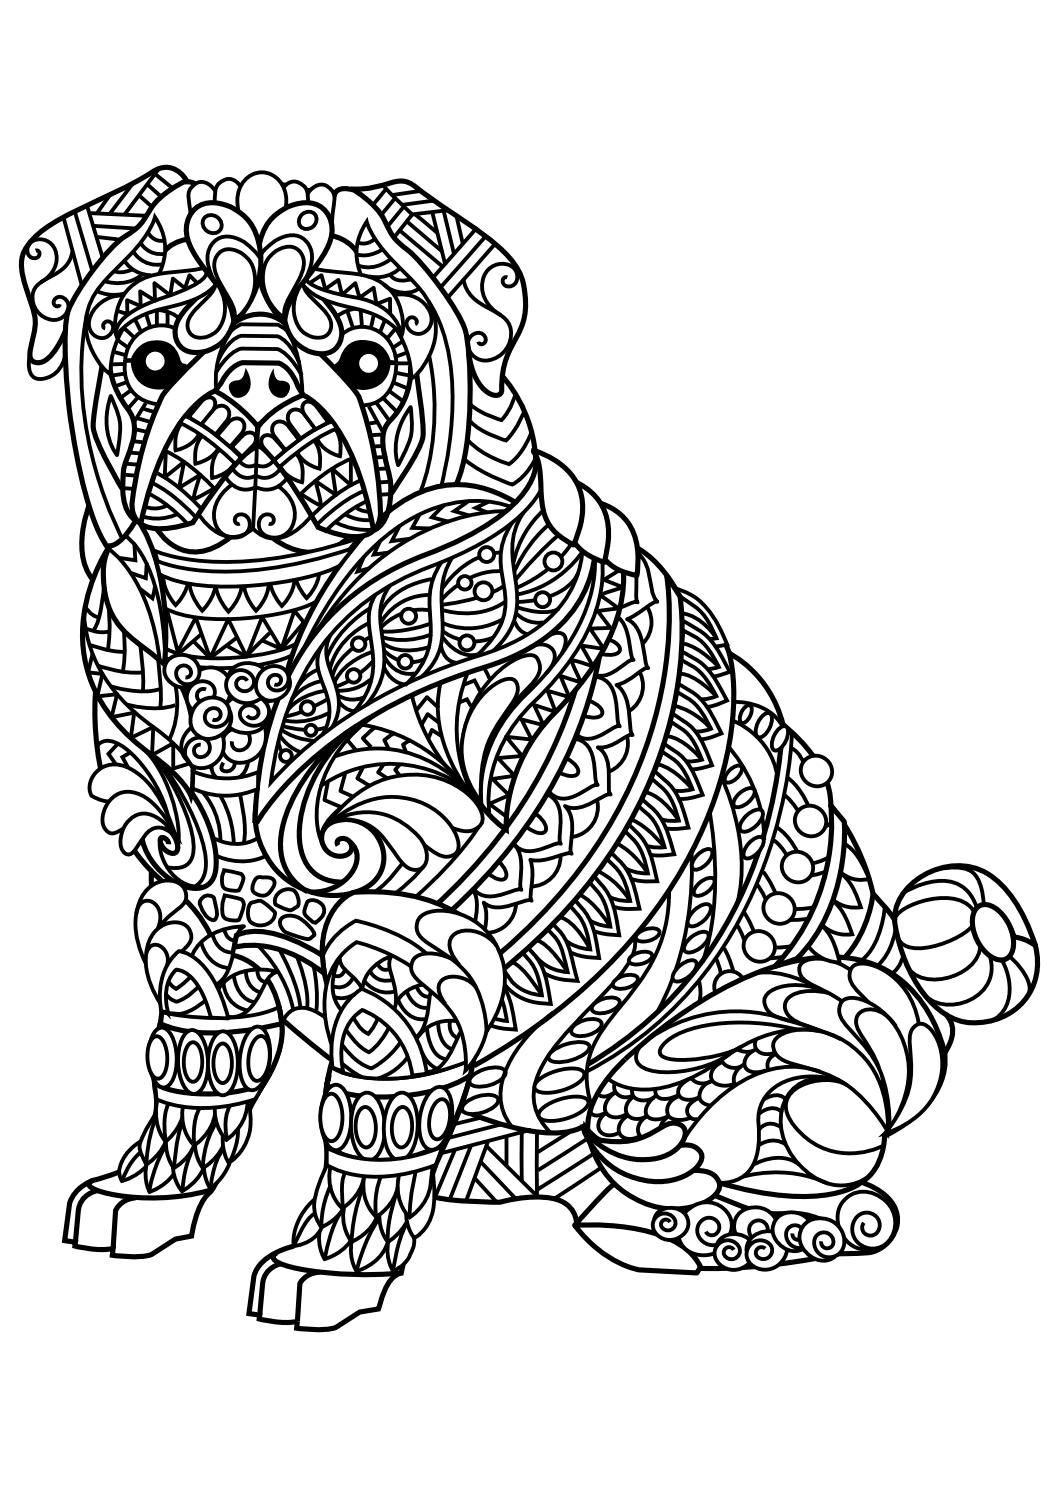 Animals Coloring Pages For Adults
 Animal coloring pages pdf Coloring Animals